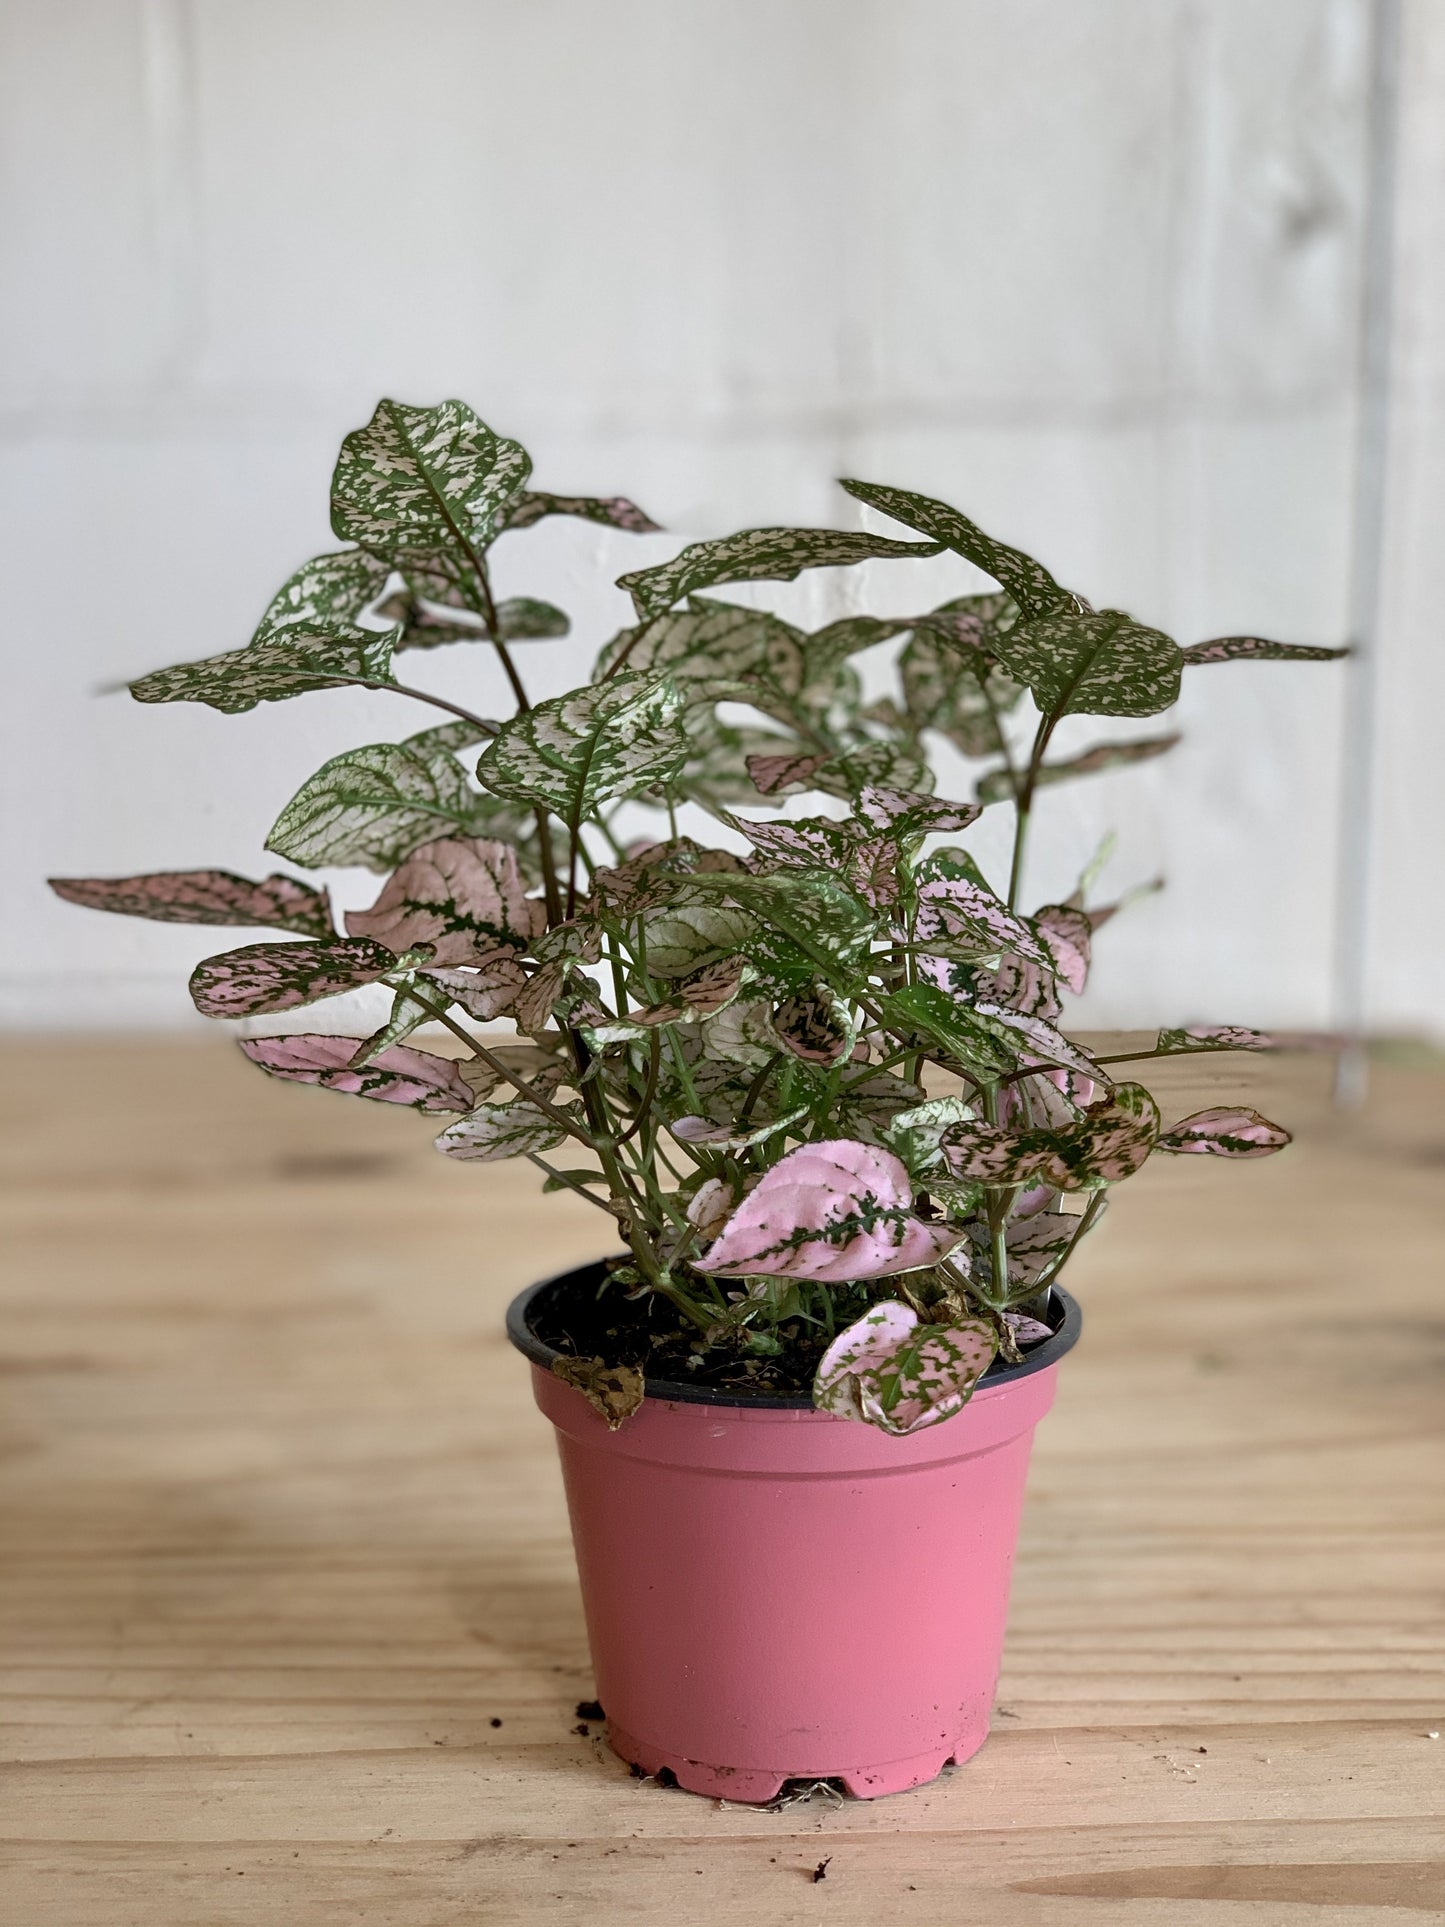 Hypoestes "Polka Dot" Plant - 4" Container